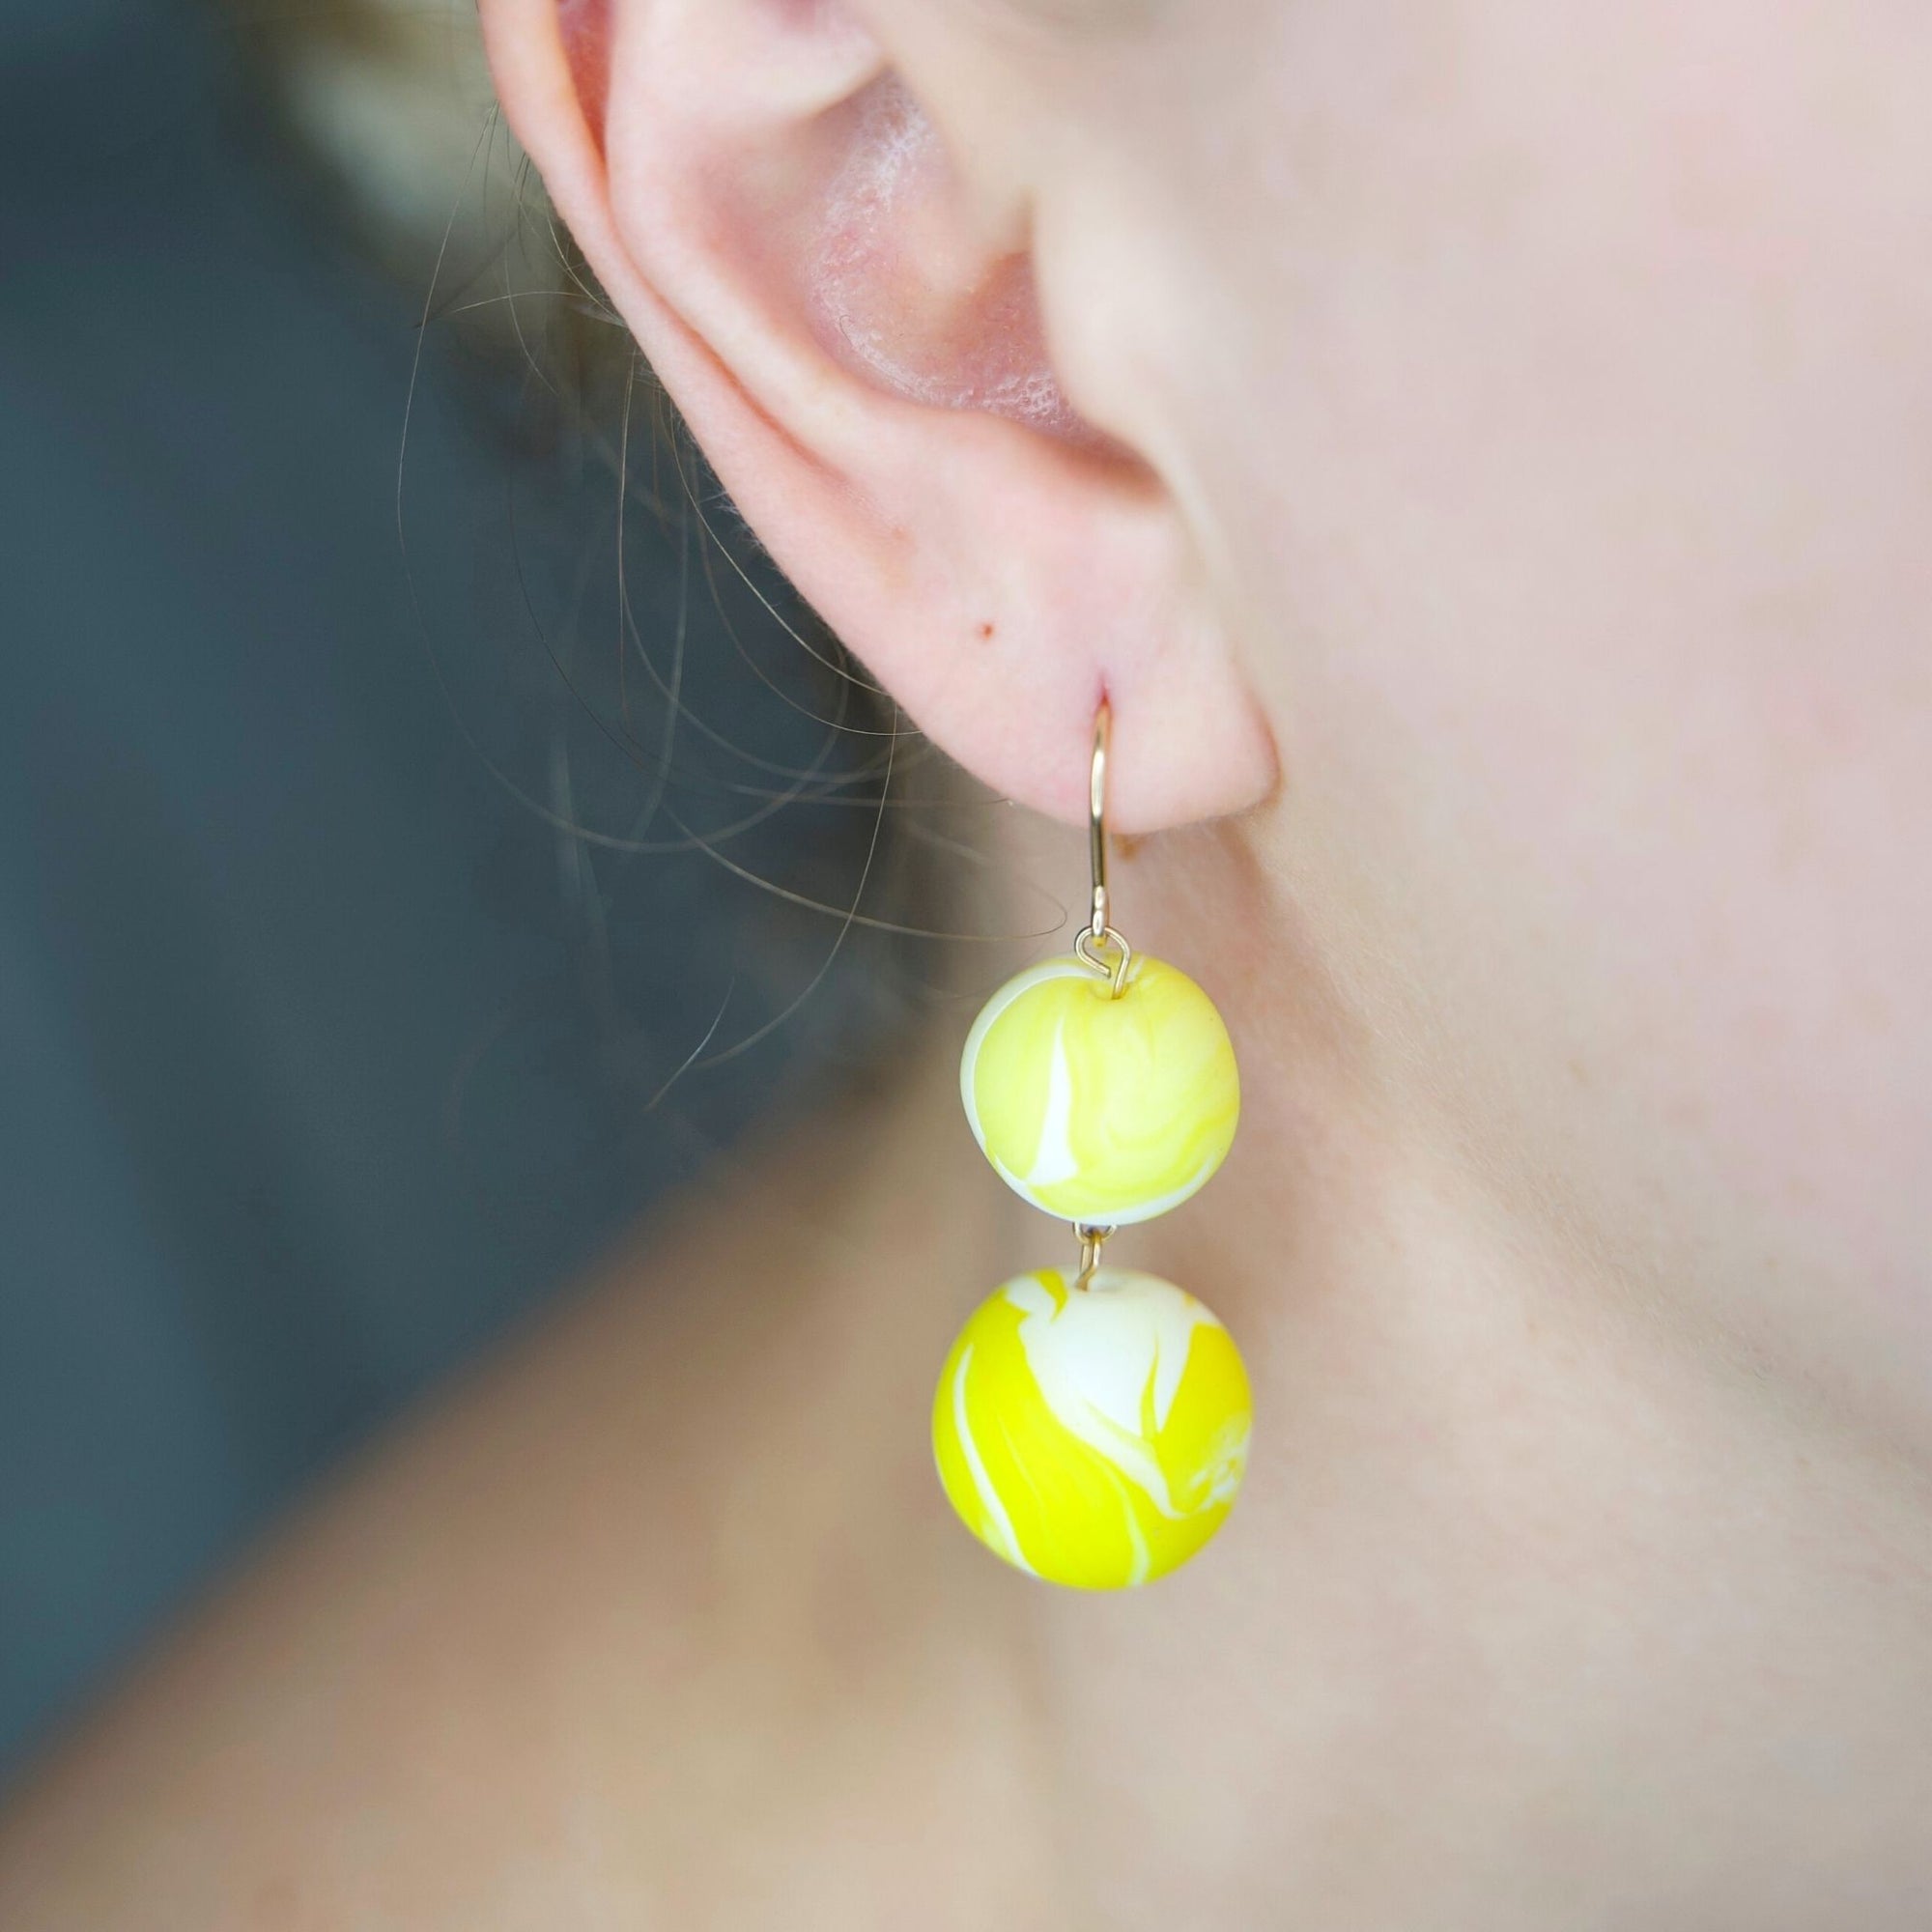 One of a Kind Earrings |  Handmade Beads | 14 kt Gold Filled Beads | ER220 Yellow